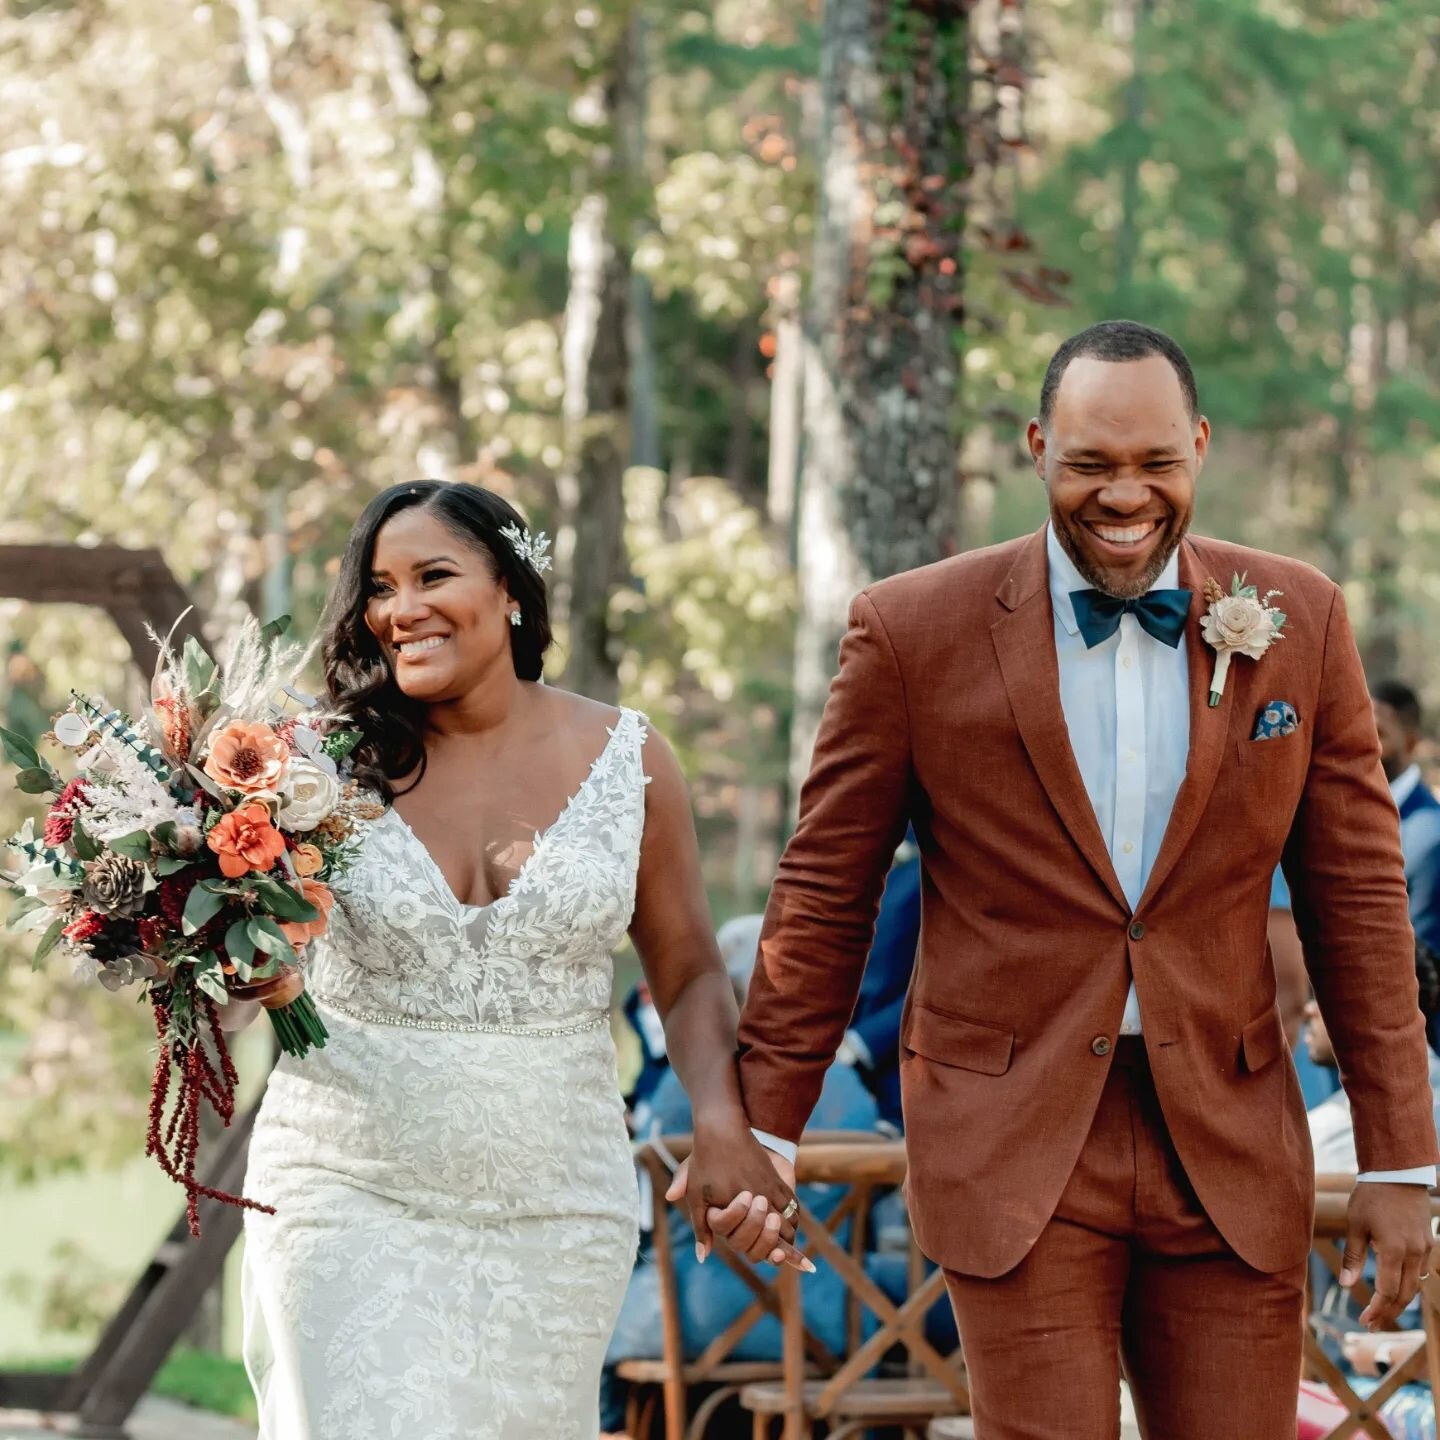 Andraes &amp; Laquisha 

Reminiscing about this beautiful autumn day when these two renewed their vows amidst the rustling leaves and warm hues. 🍂💍 

Bridal Bouquet: Handpicked X-Large 

Vendors:
Venue: @hiddenspringsvenue
Photography: @benniebates